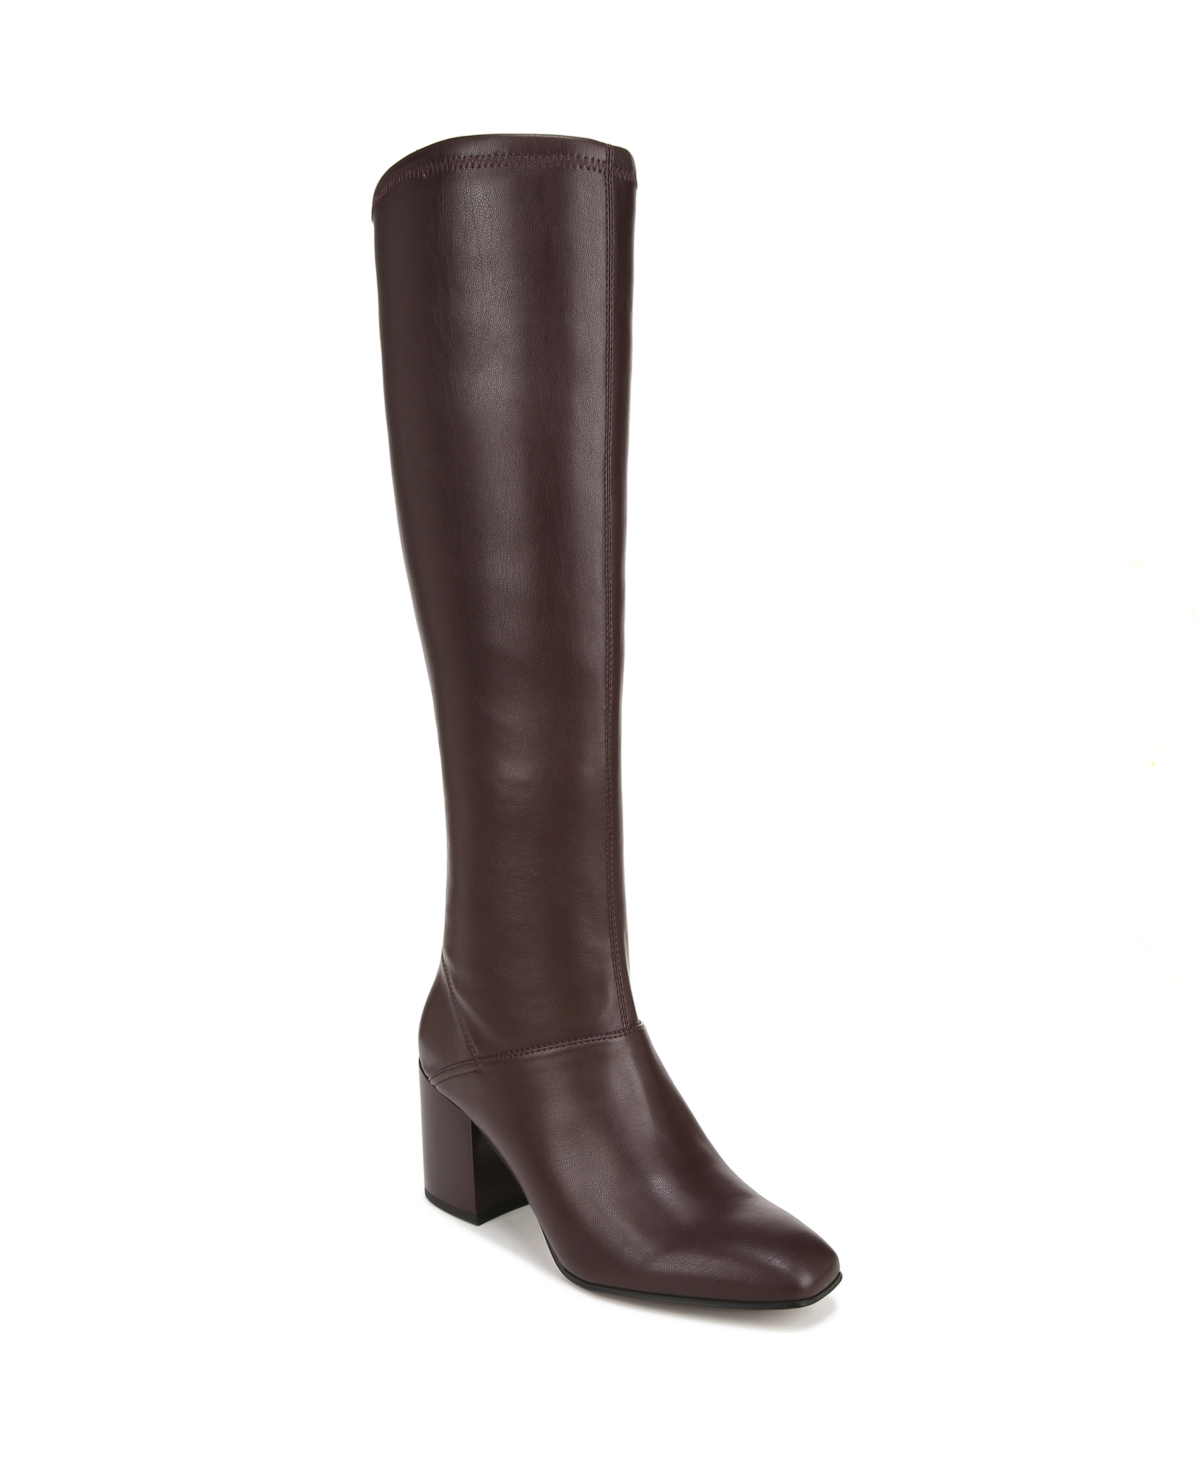 Tribute Knee High Boots - Cordovan Brown Faux Leather